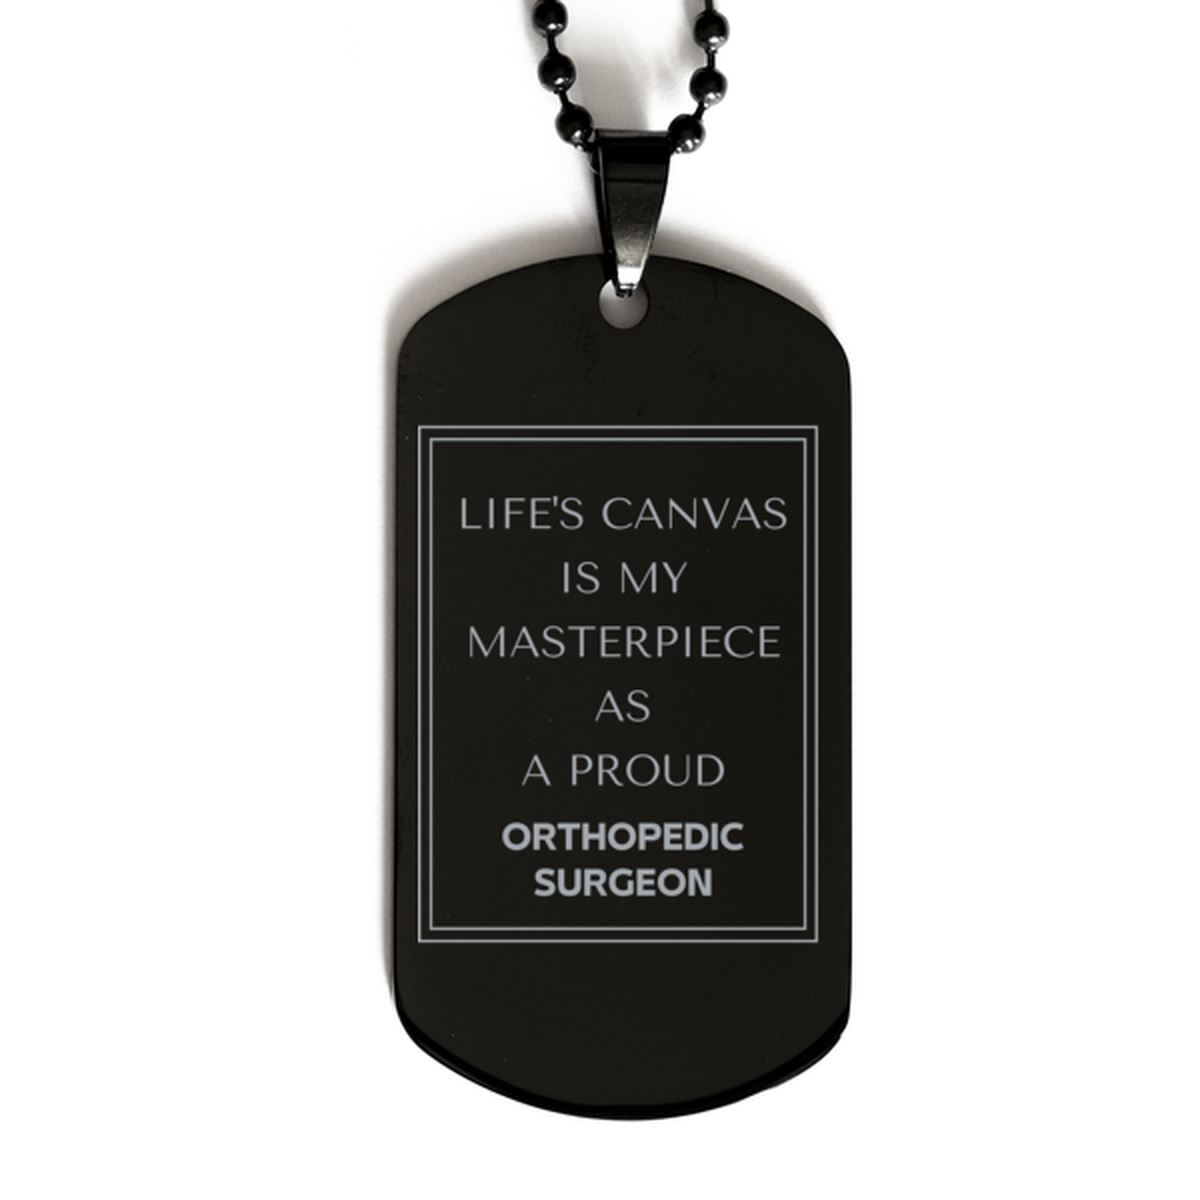 Proud Orthopedic Surgeon Gifts, Life's canvas is my masterpiece, Epic Birthday Christmas Unique Black Dog Tag For Orthopedic Surgeon, Coworkers, Men, Women, Friends